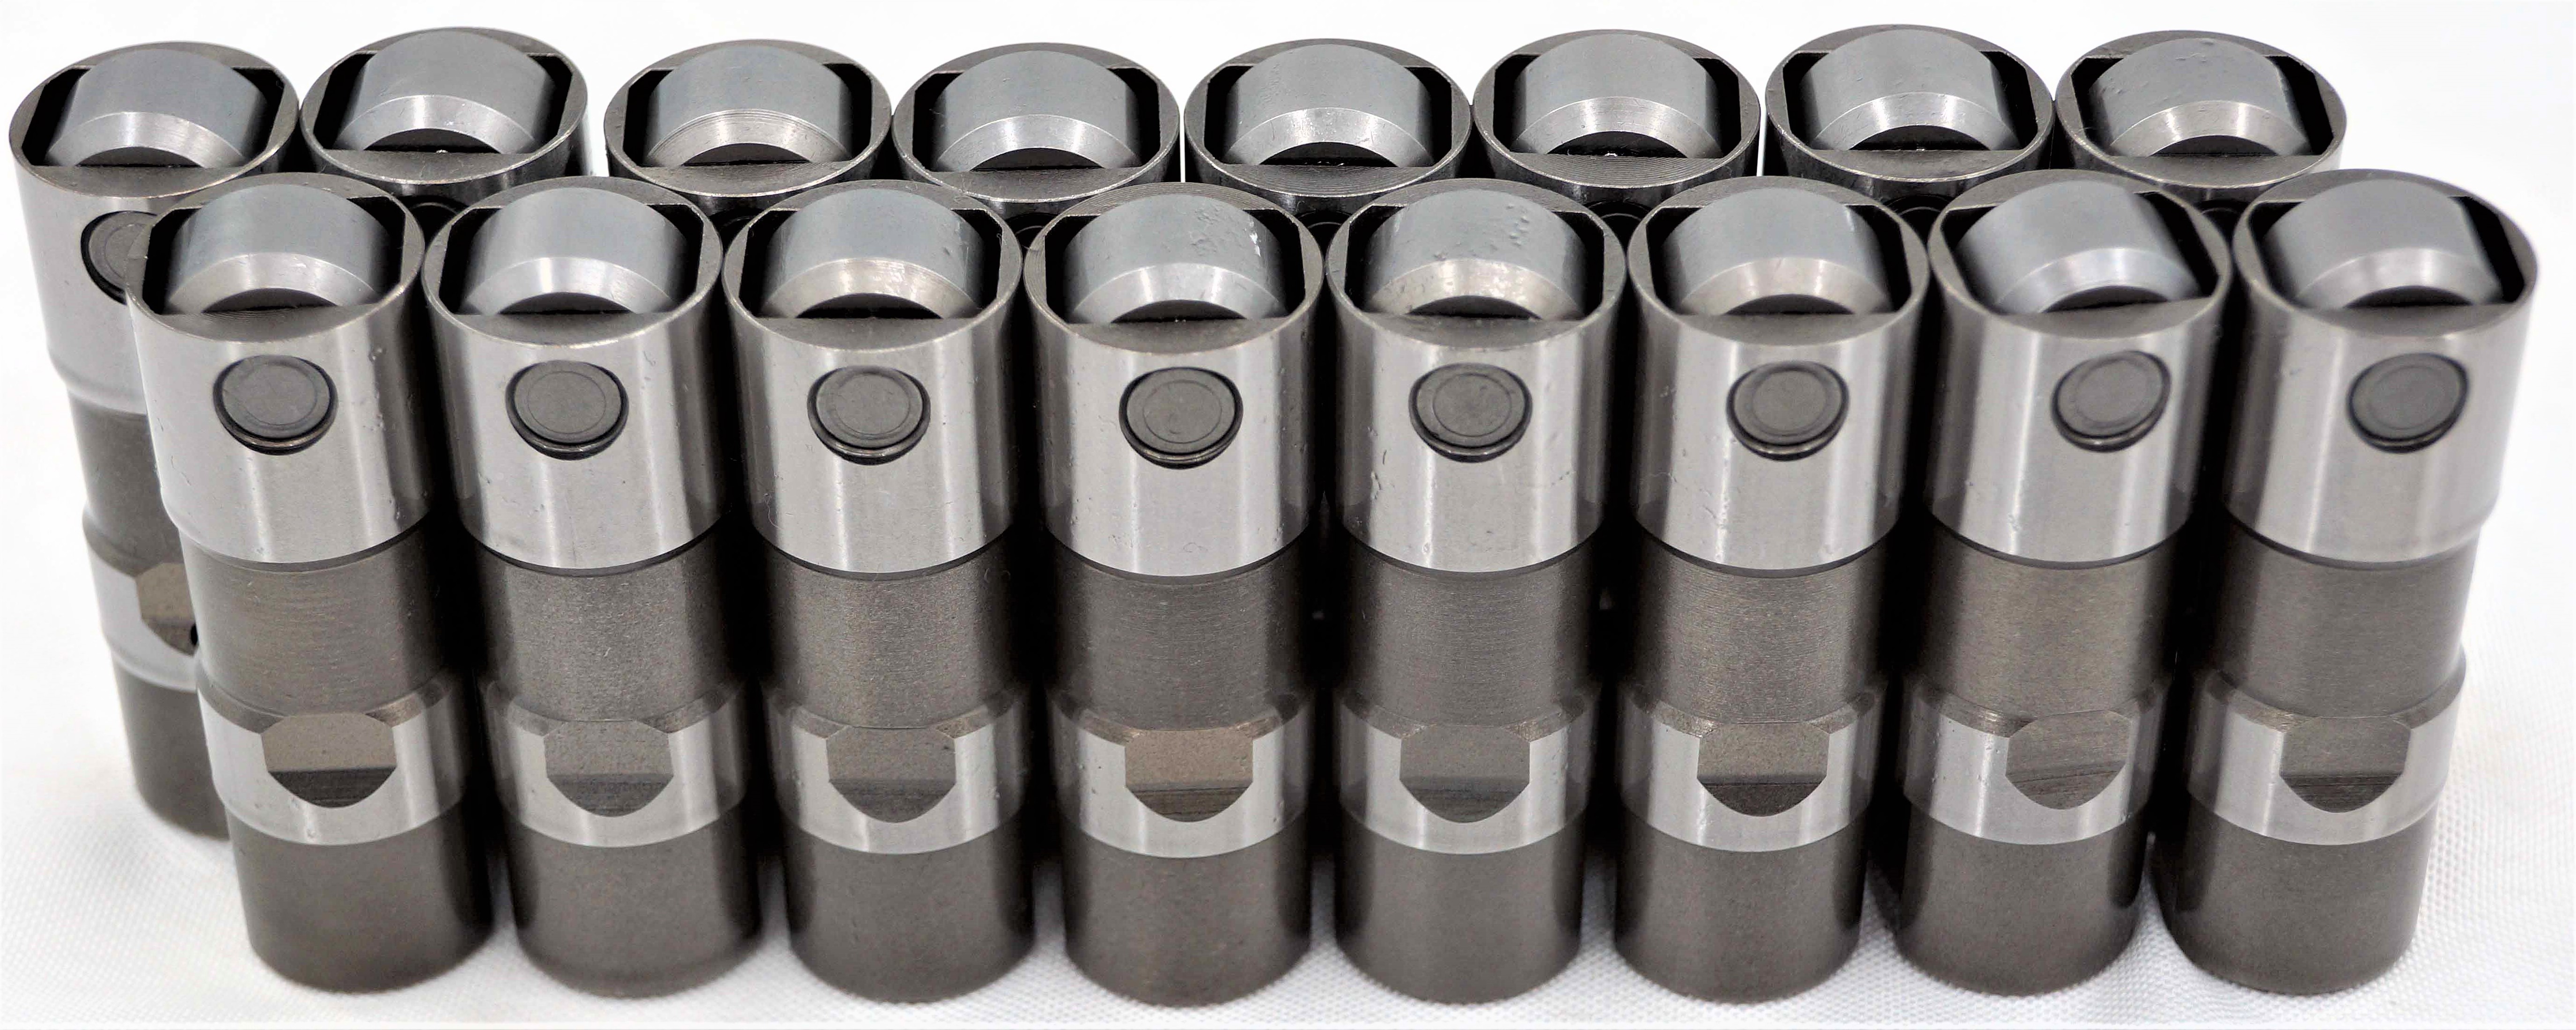 OverstockDirect HL124 LS7 LS2 16 Hydraulic Roller Lifters & 4 Guides Replacement - image 2